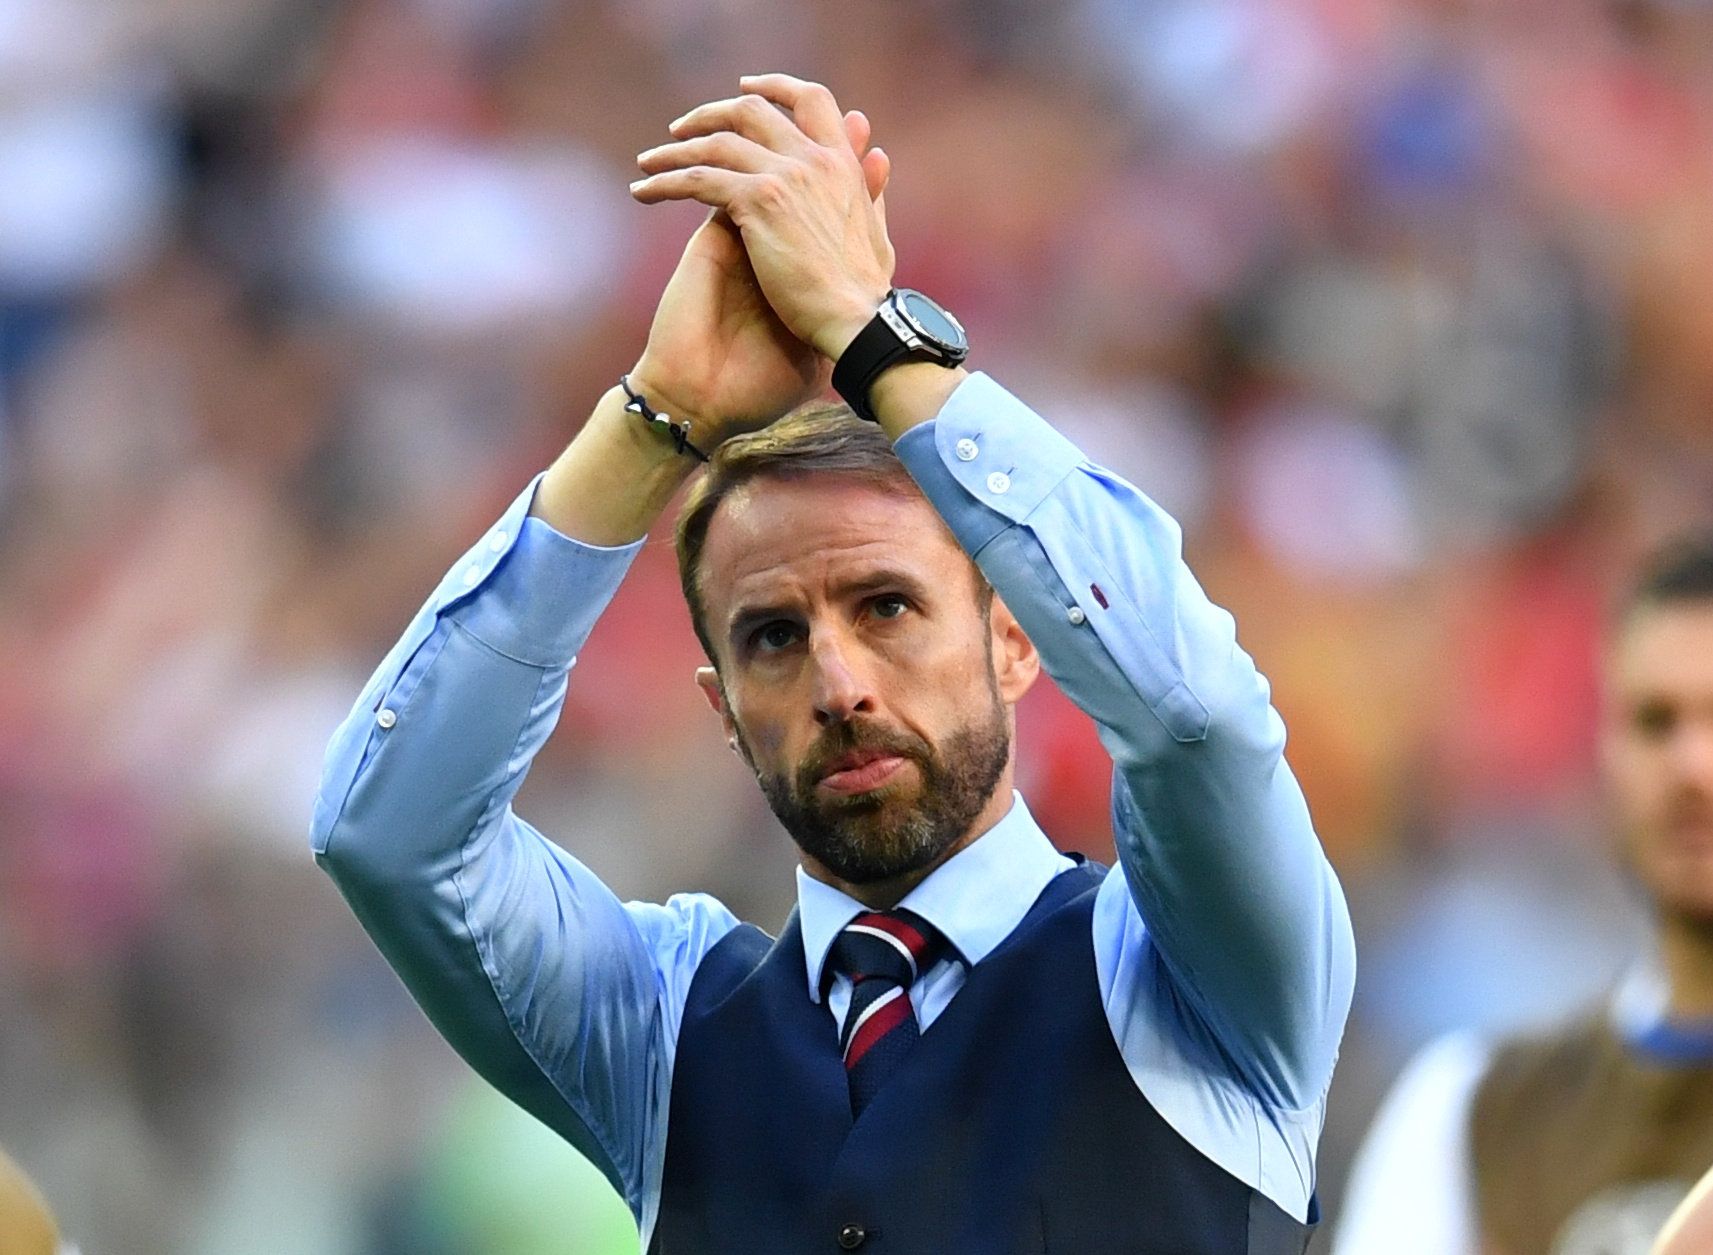 Soccer Football - World Cup - Third Place Play Off - Belgium v England - Saint Petersburg Stadium, Saint Petersburg, Russia - July 14, 2018  England manager Gareth Southgate applauds fans after the match   REUTERS/Dylan Martinez